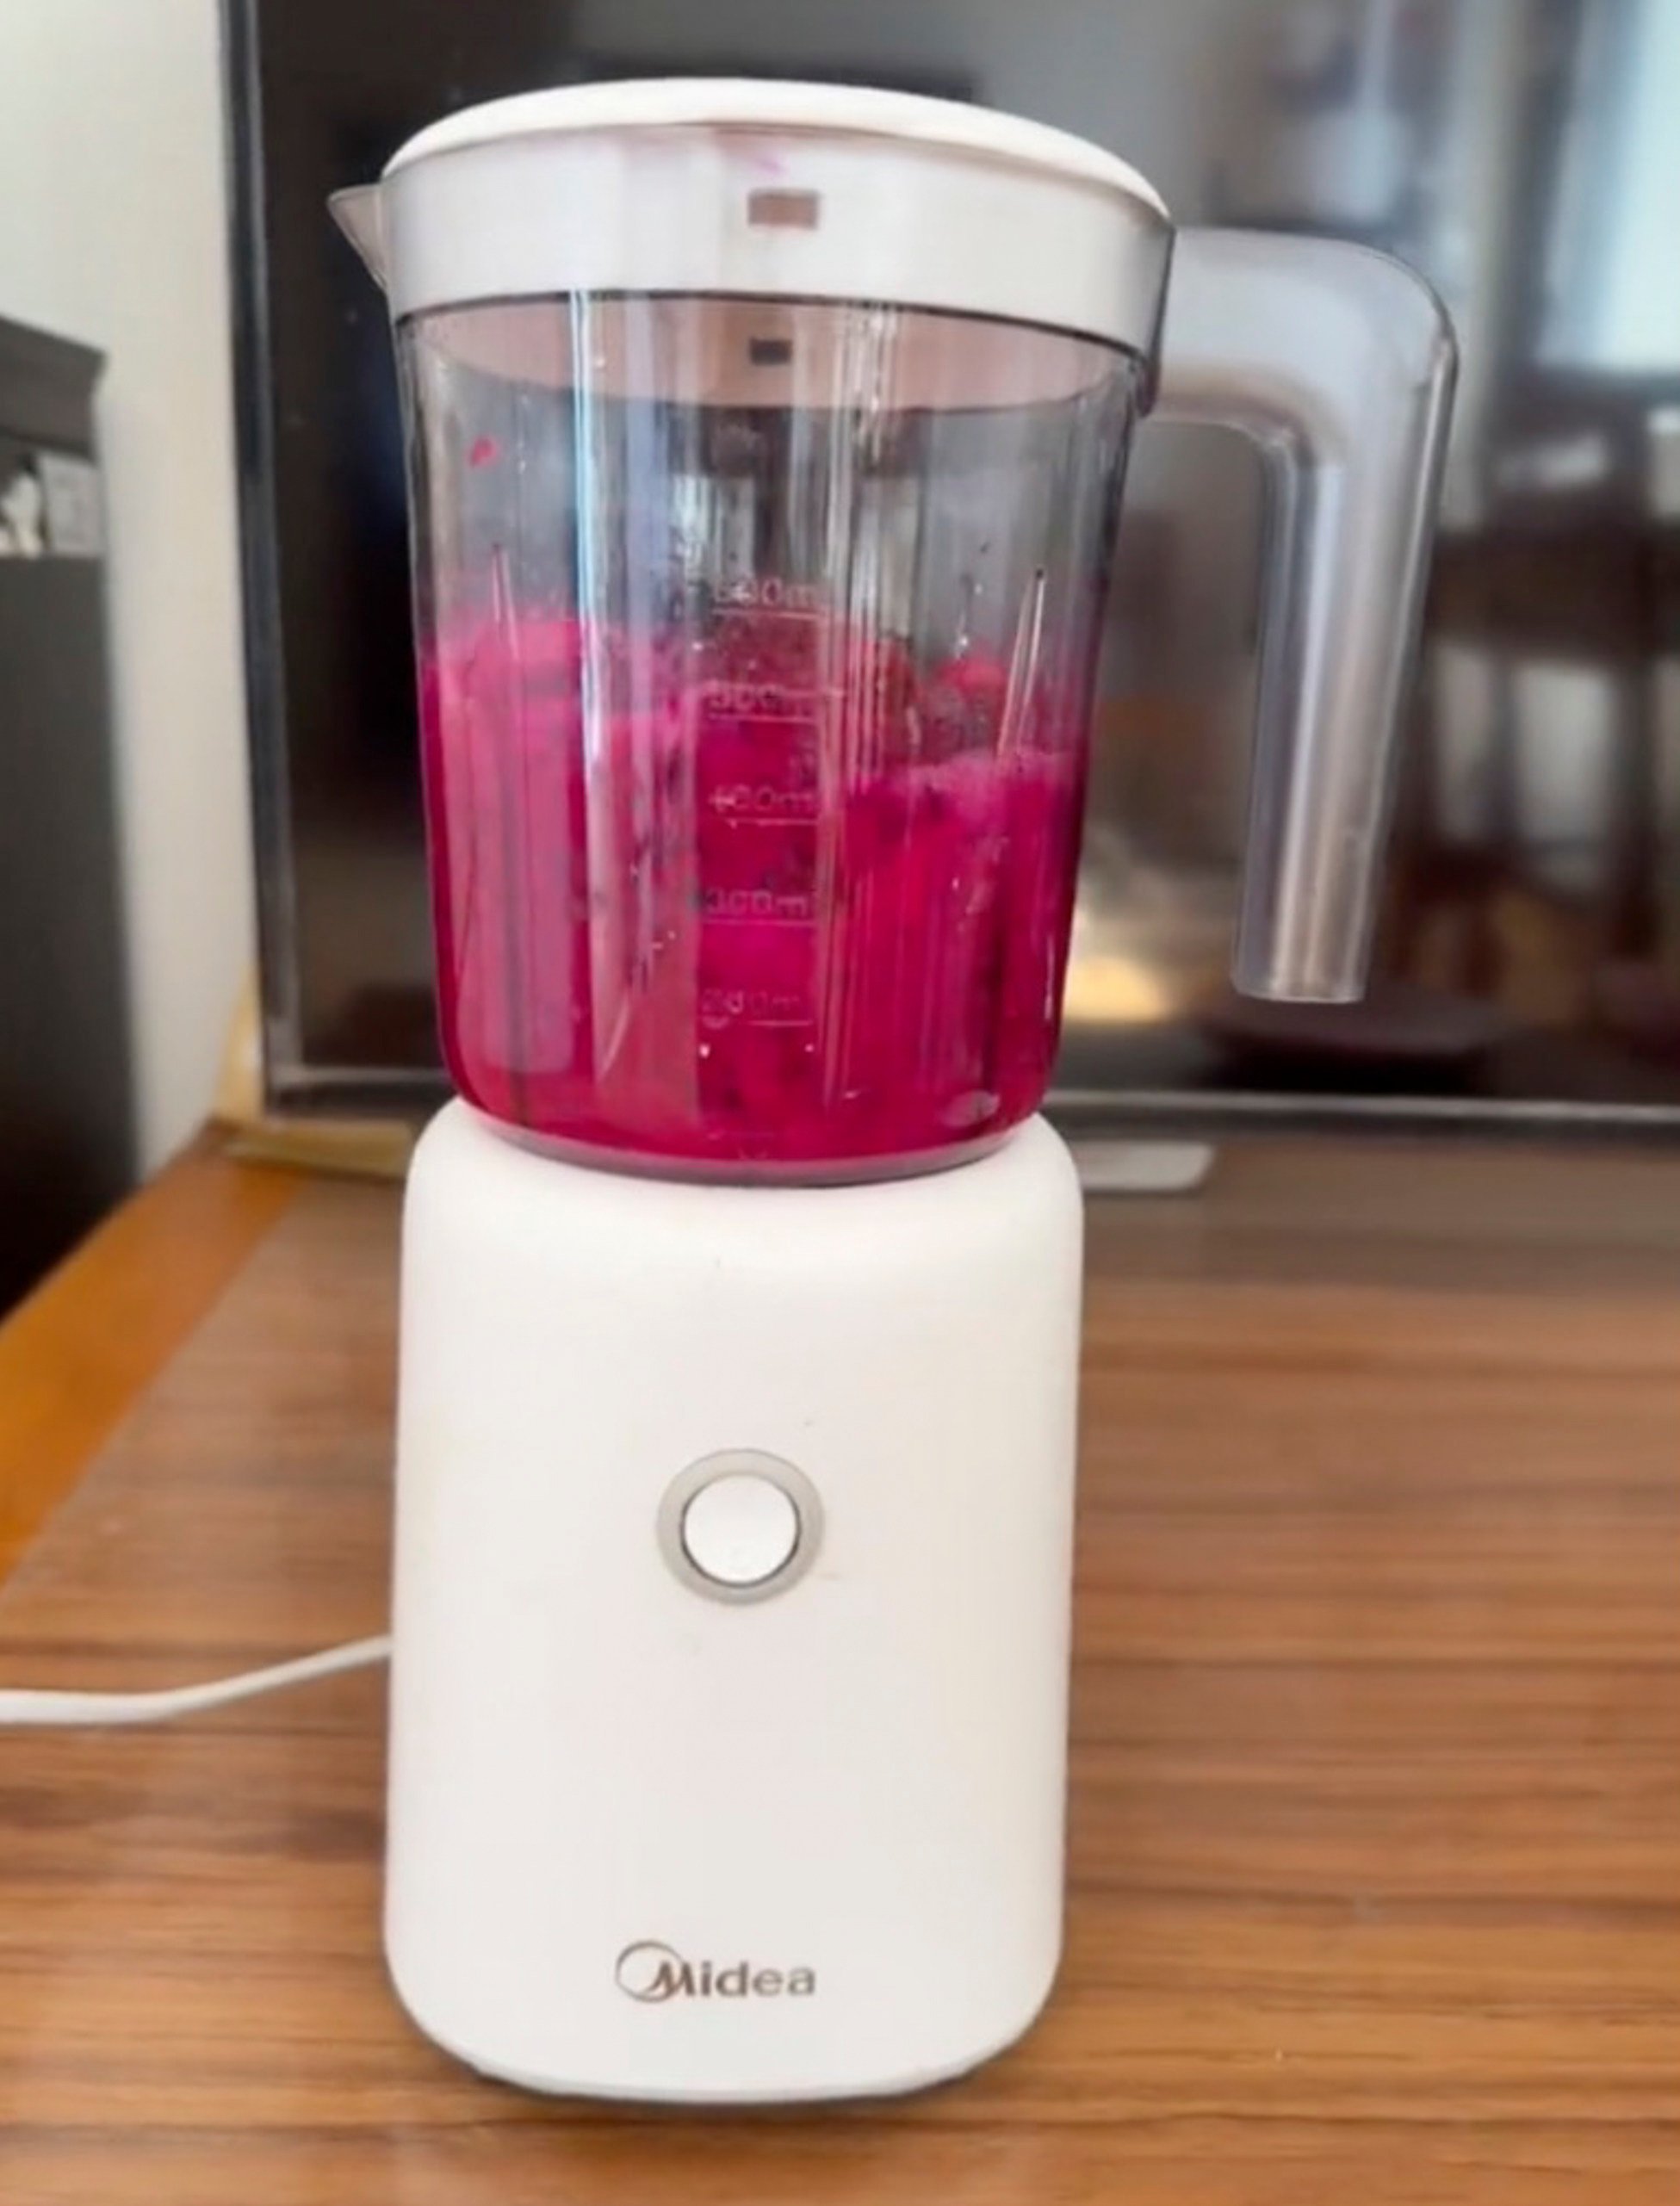 Don’t forget to add water to dilute the juice colour, says the man in a follow-up video after the first dyeing attempt went wrong. Photo: Douyin